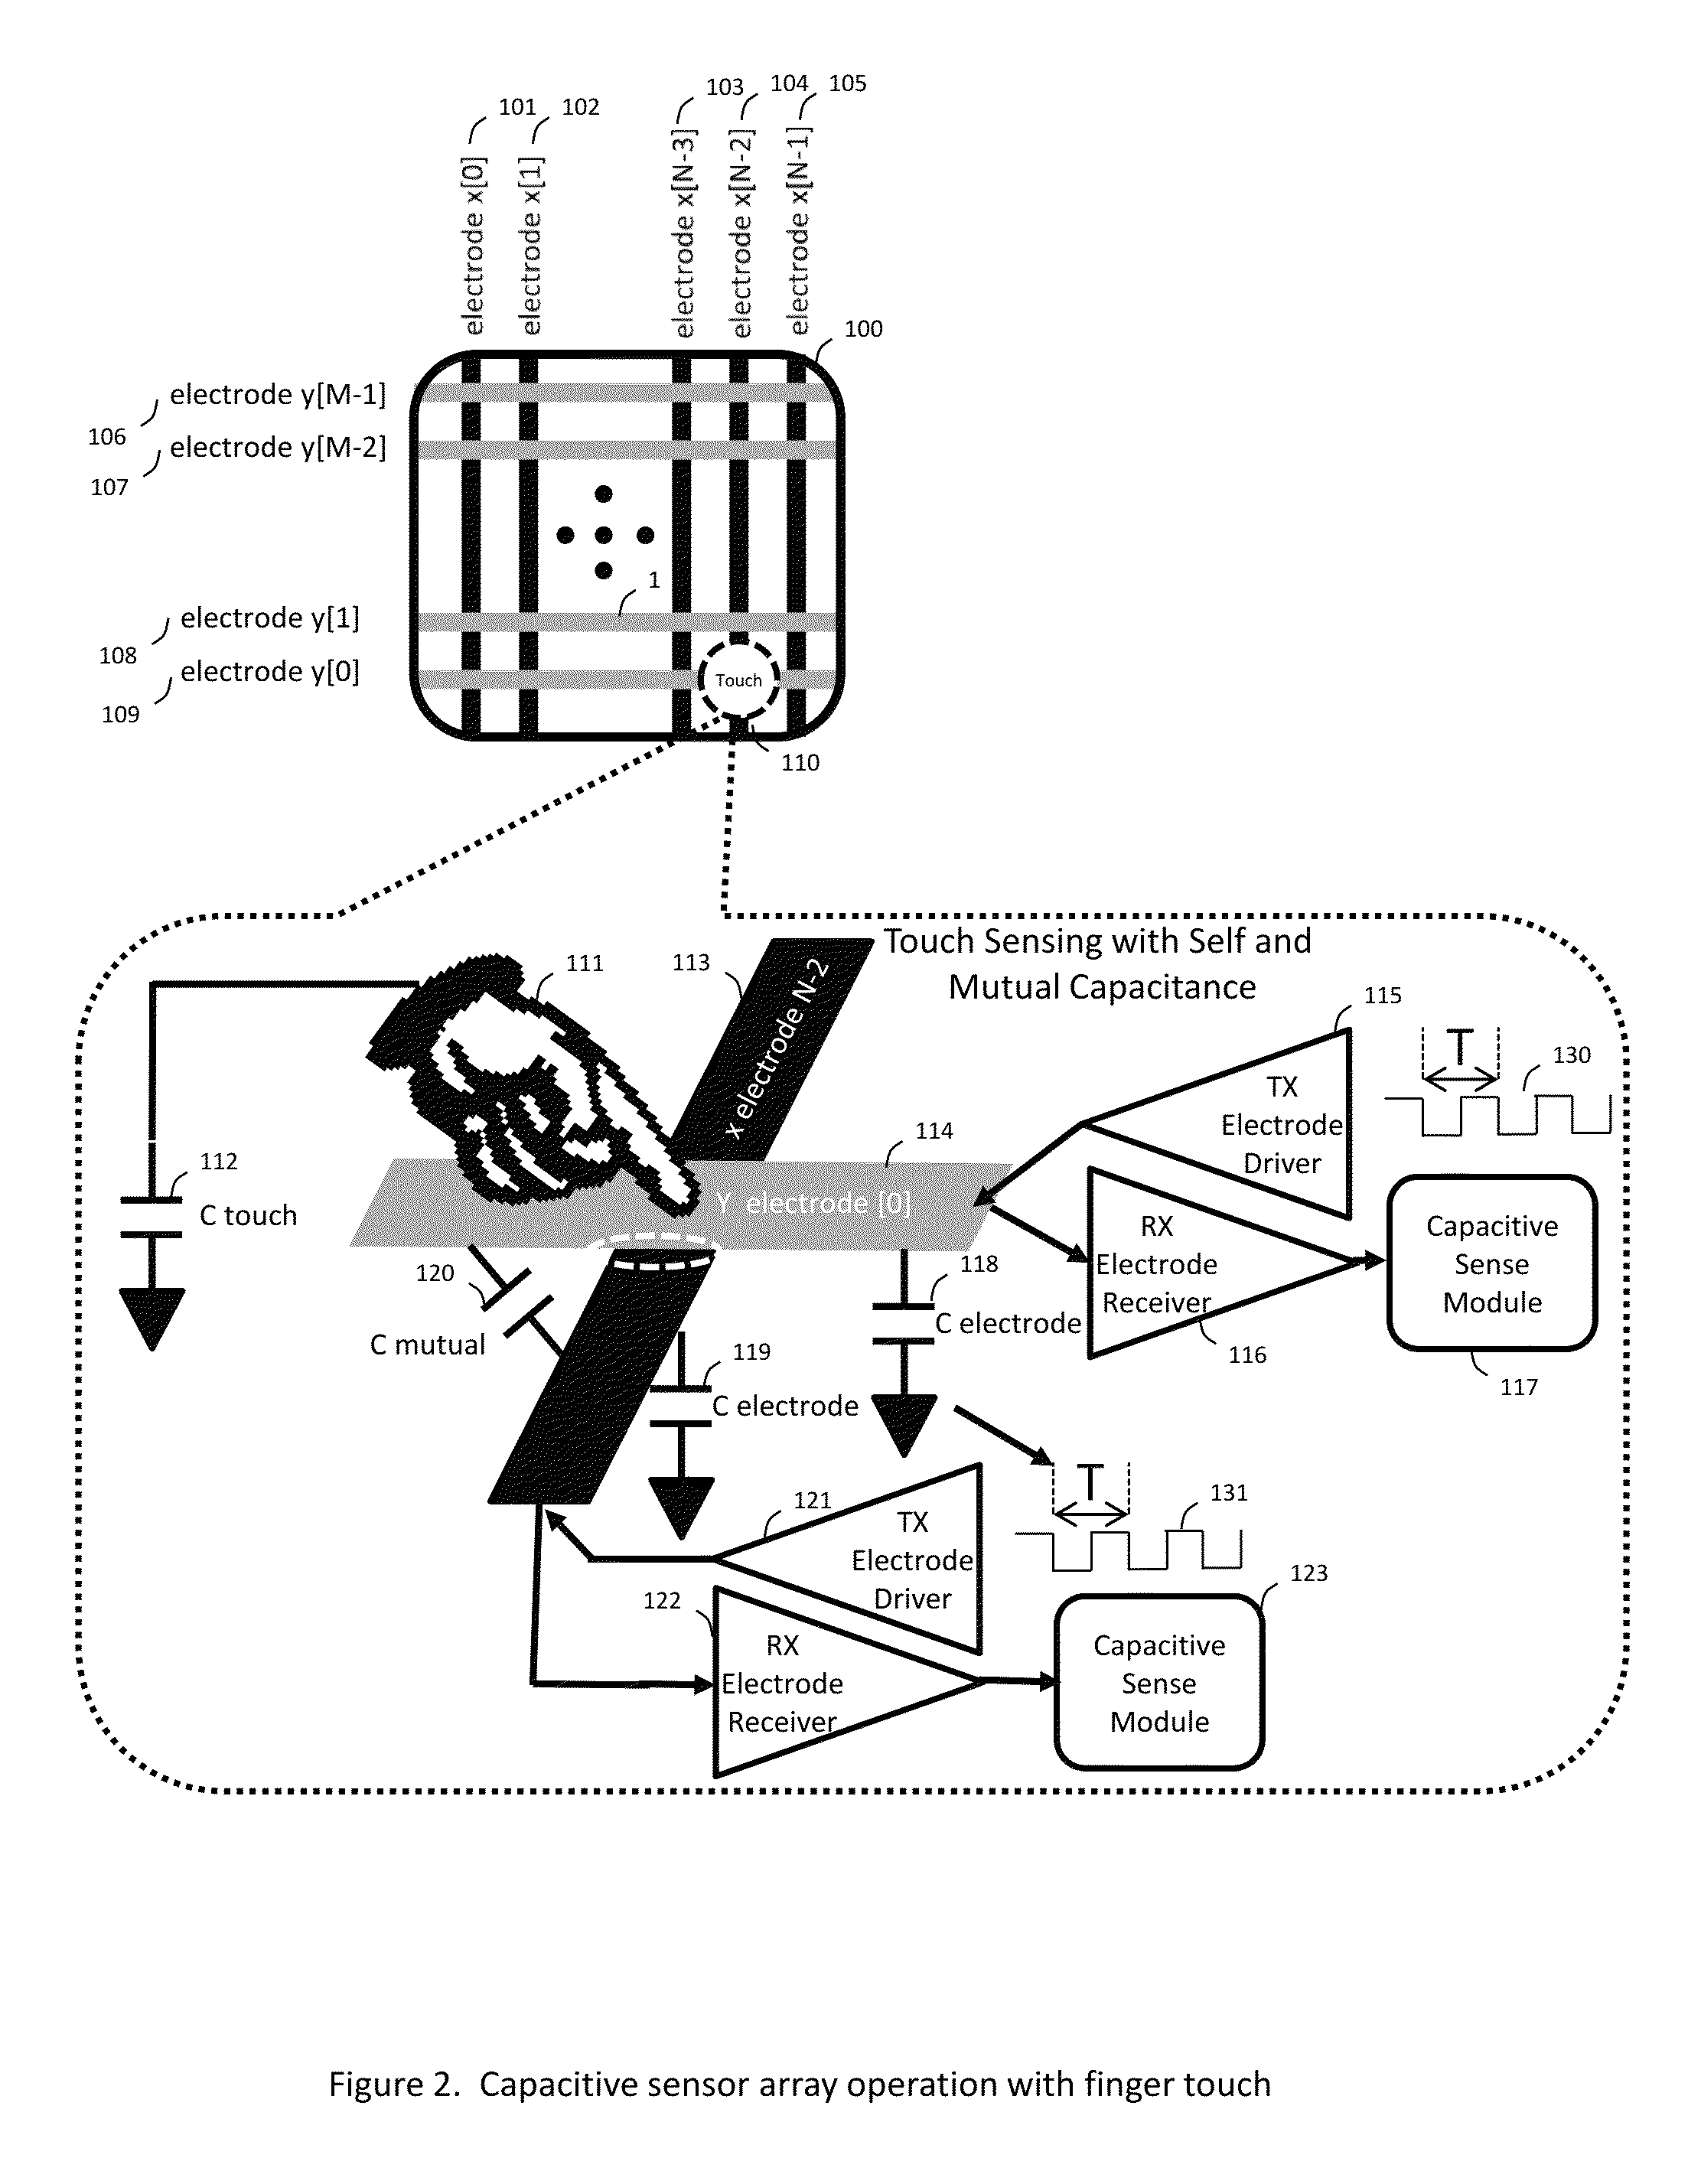 Method and apparatus for emulating touch and gesture events on a capacitive touch sensor